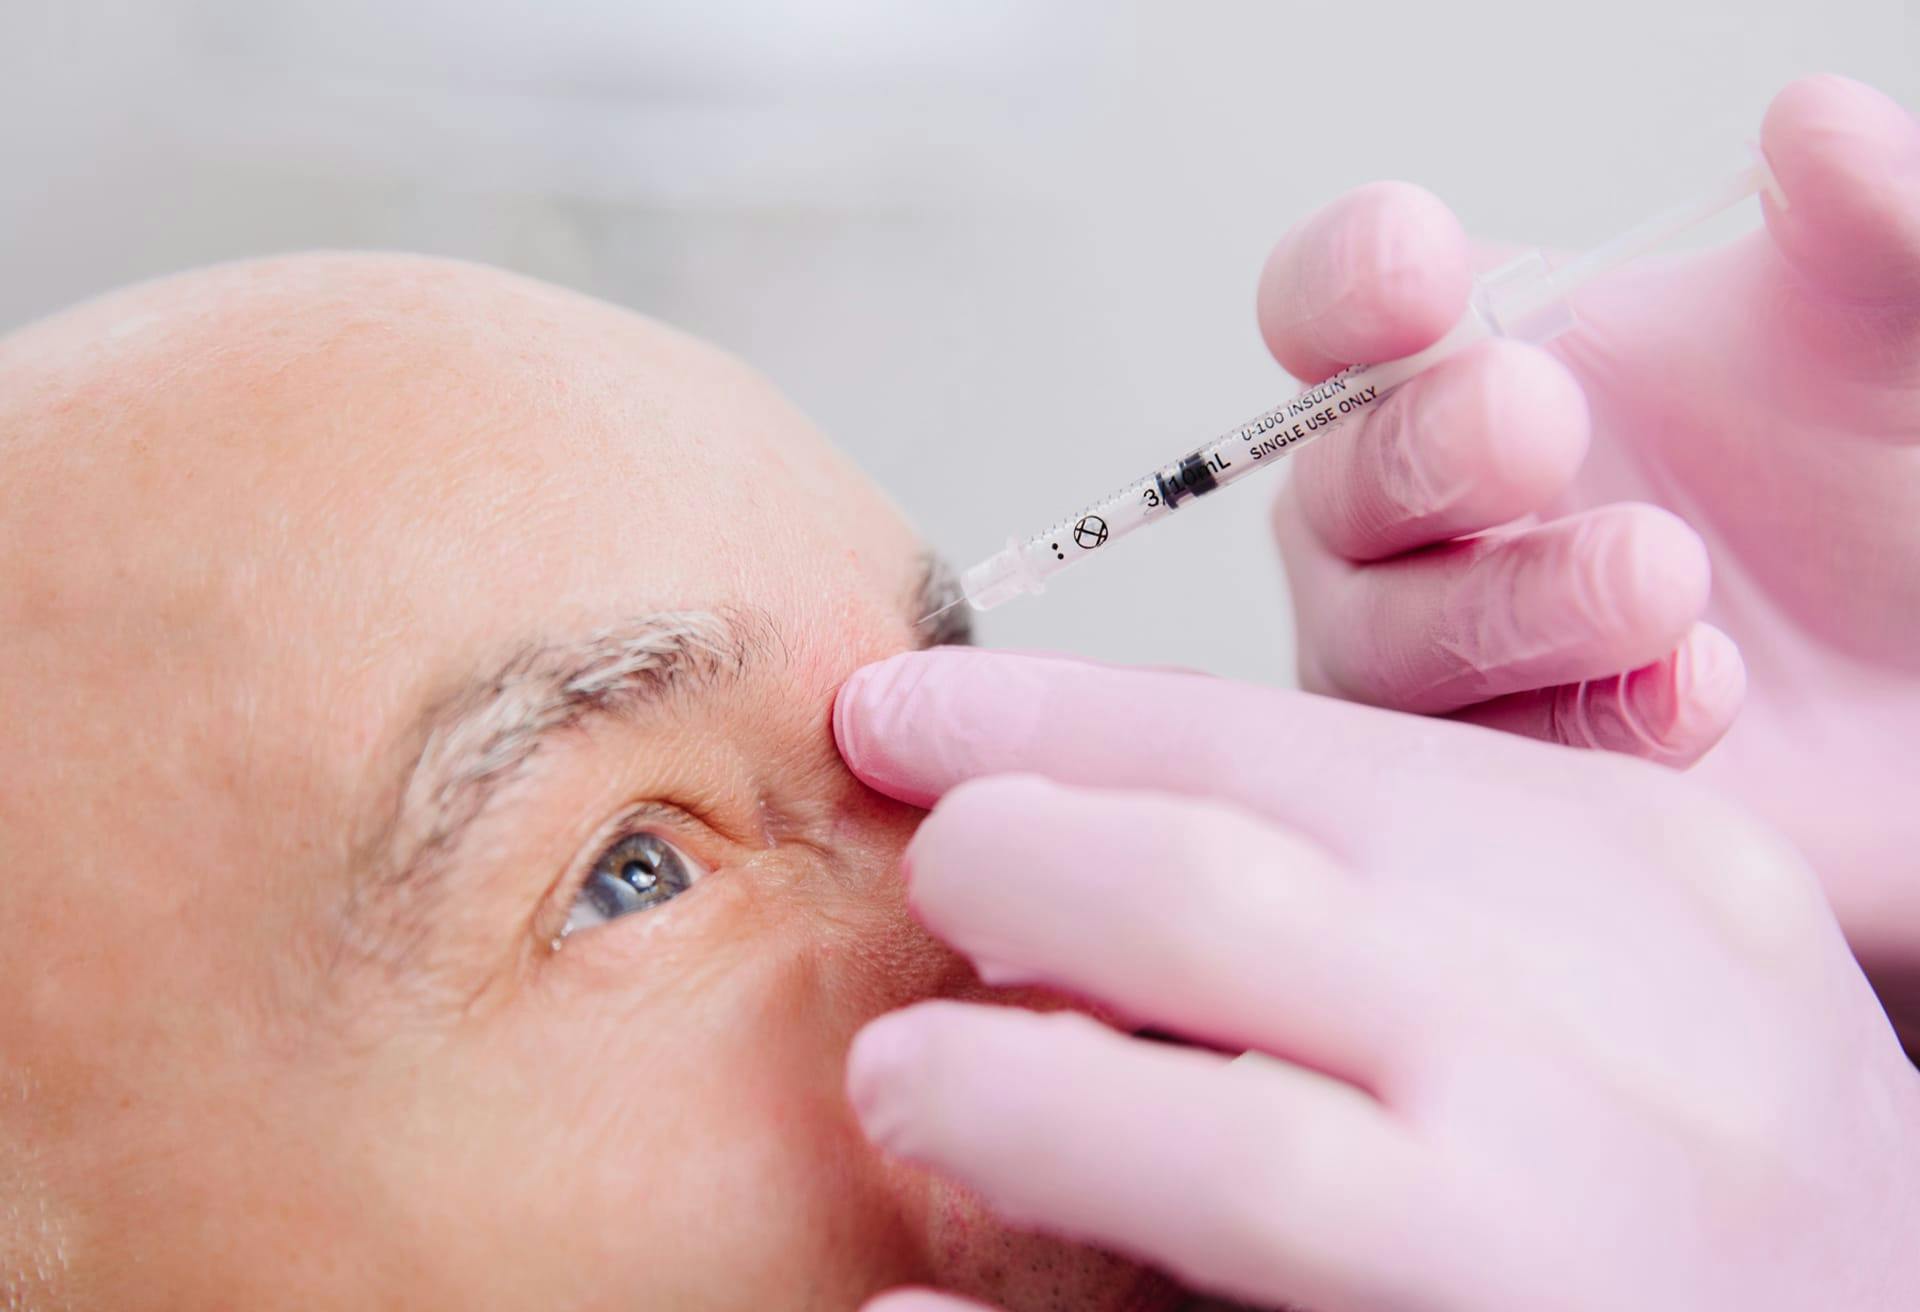 man getting fillers in the eyebrow area